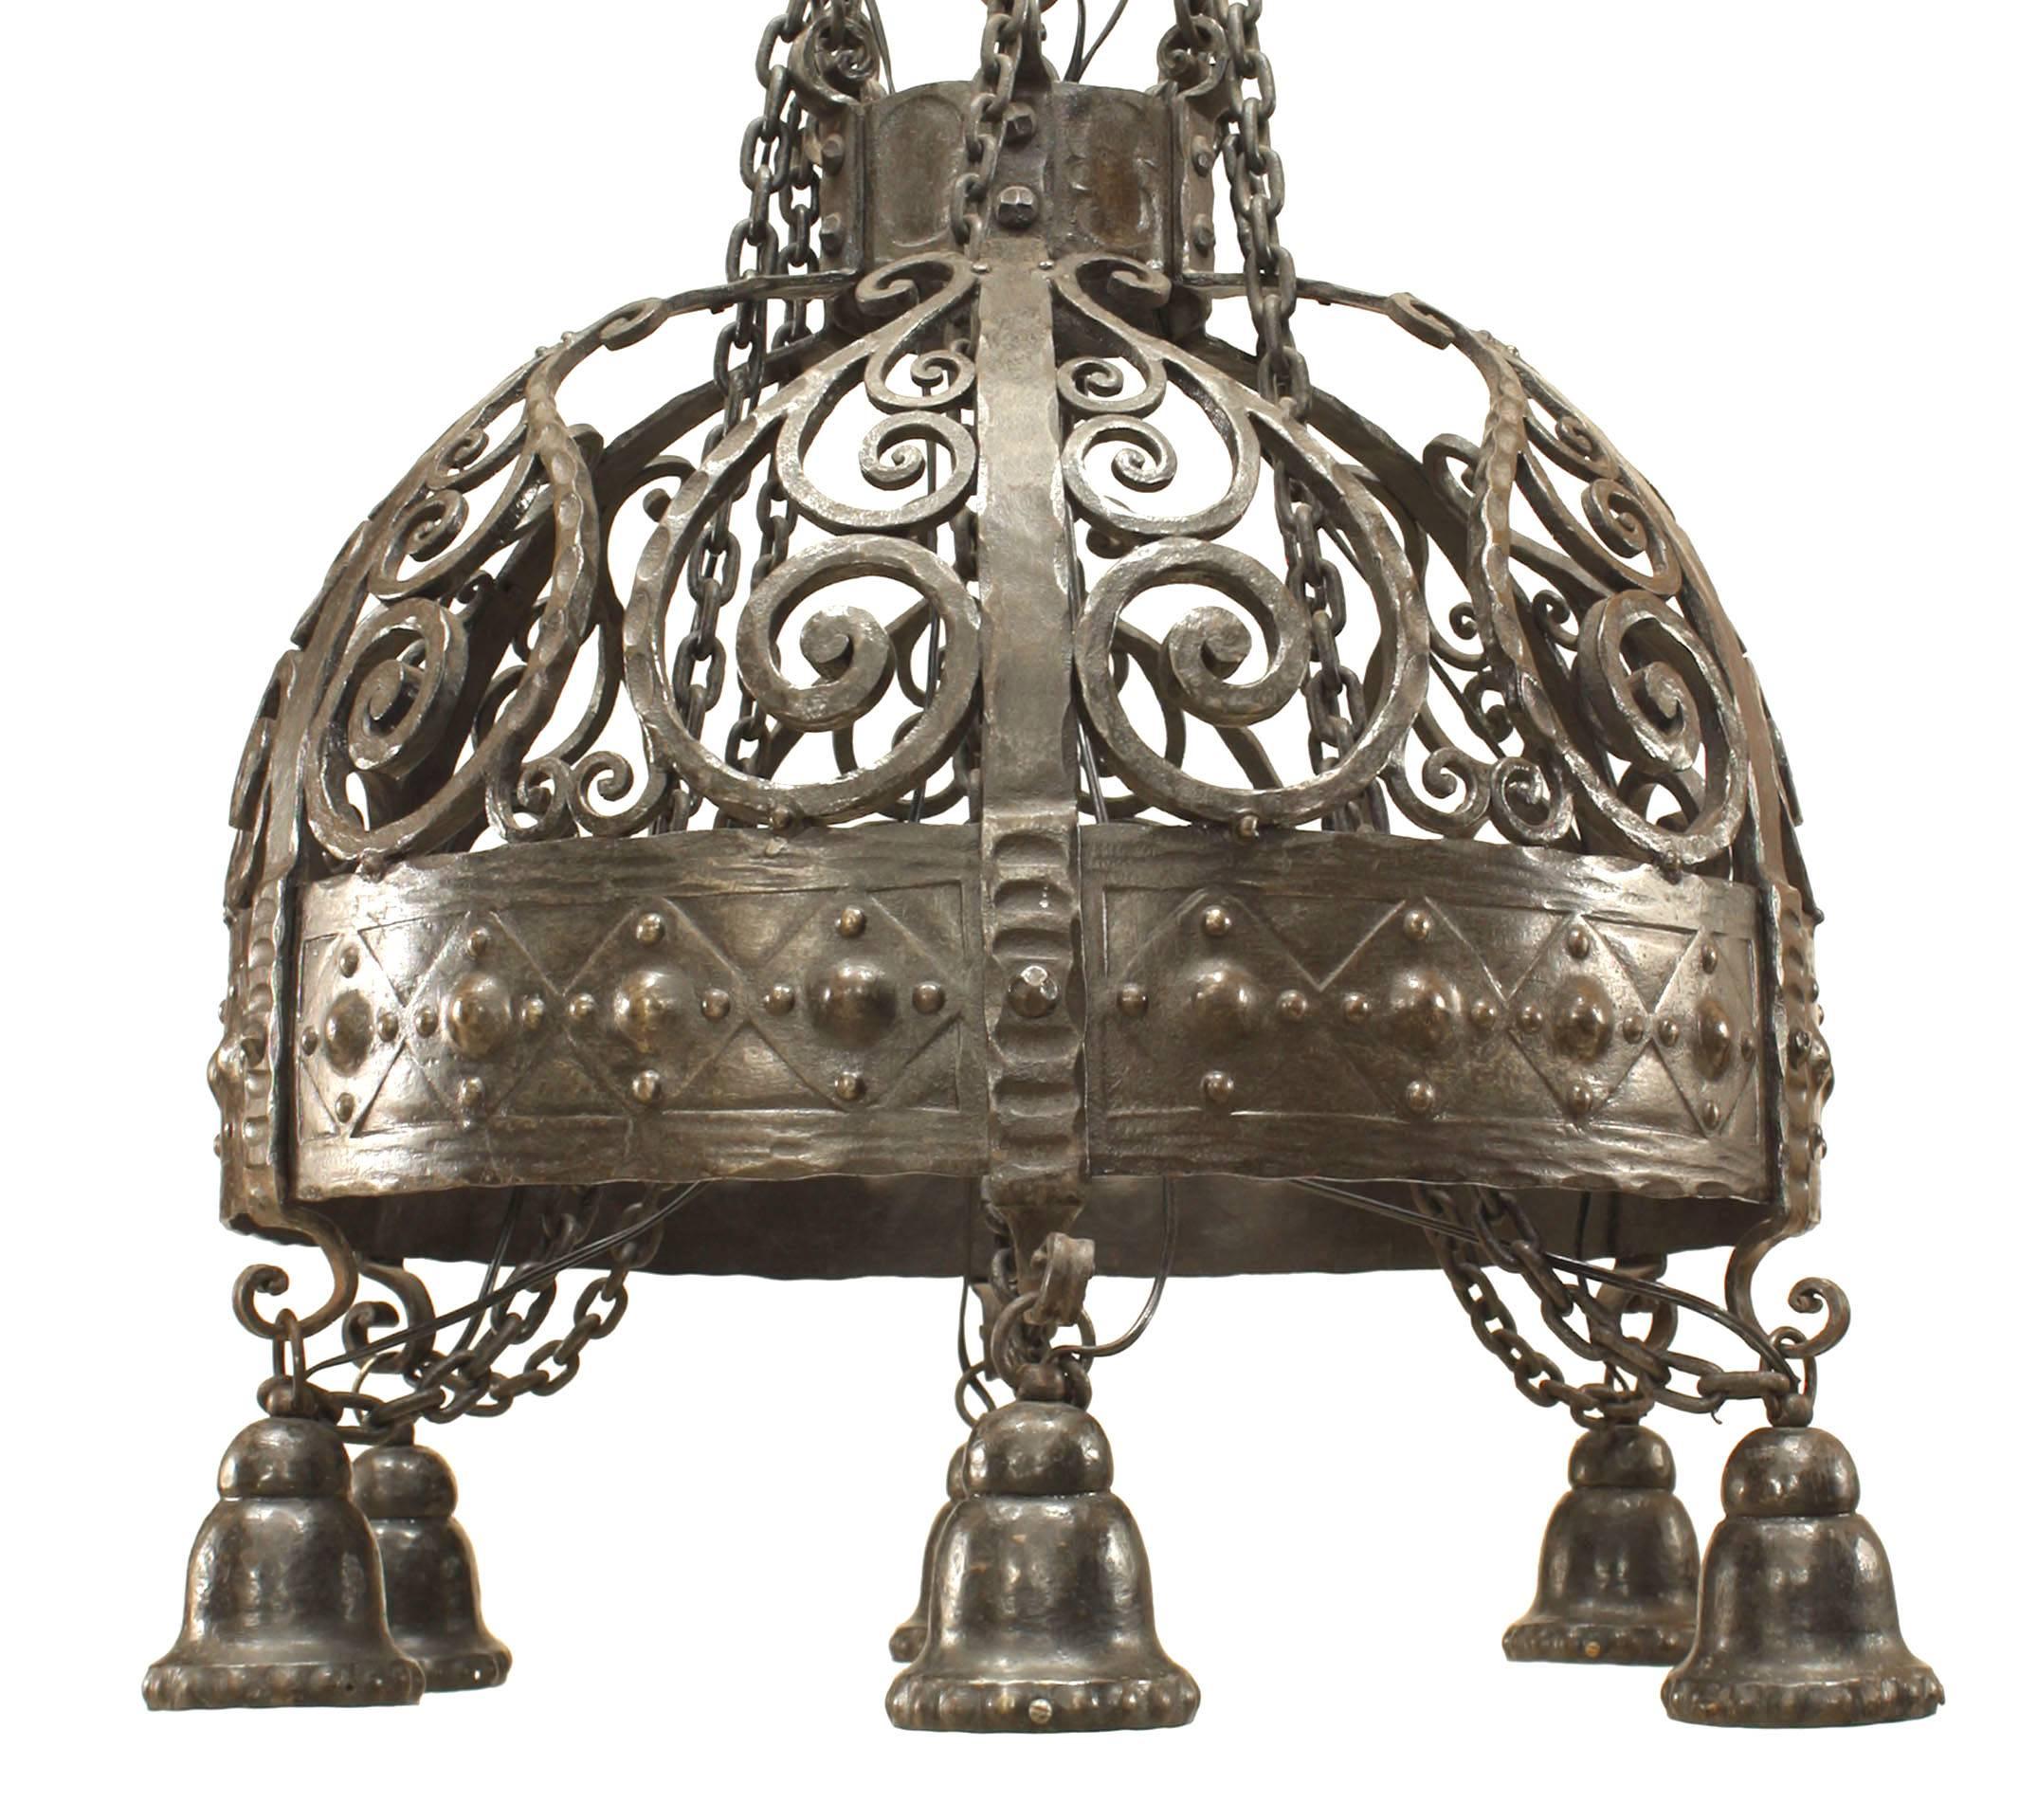 German (1920's) wrought iron large dome shaped 6 light chandelier with filigree scroll design suspended by 6 link chains attached to a canopy.
